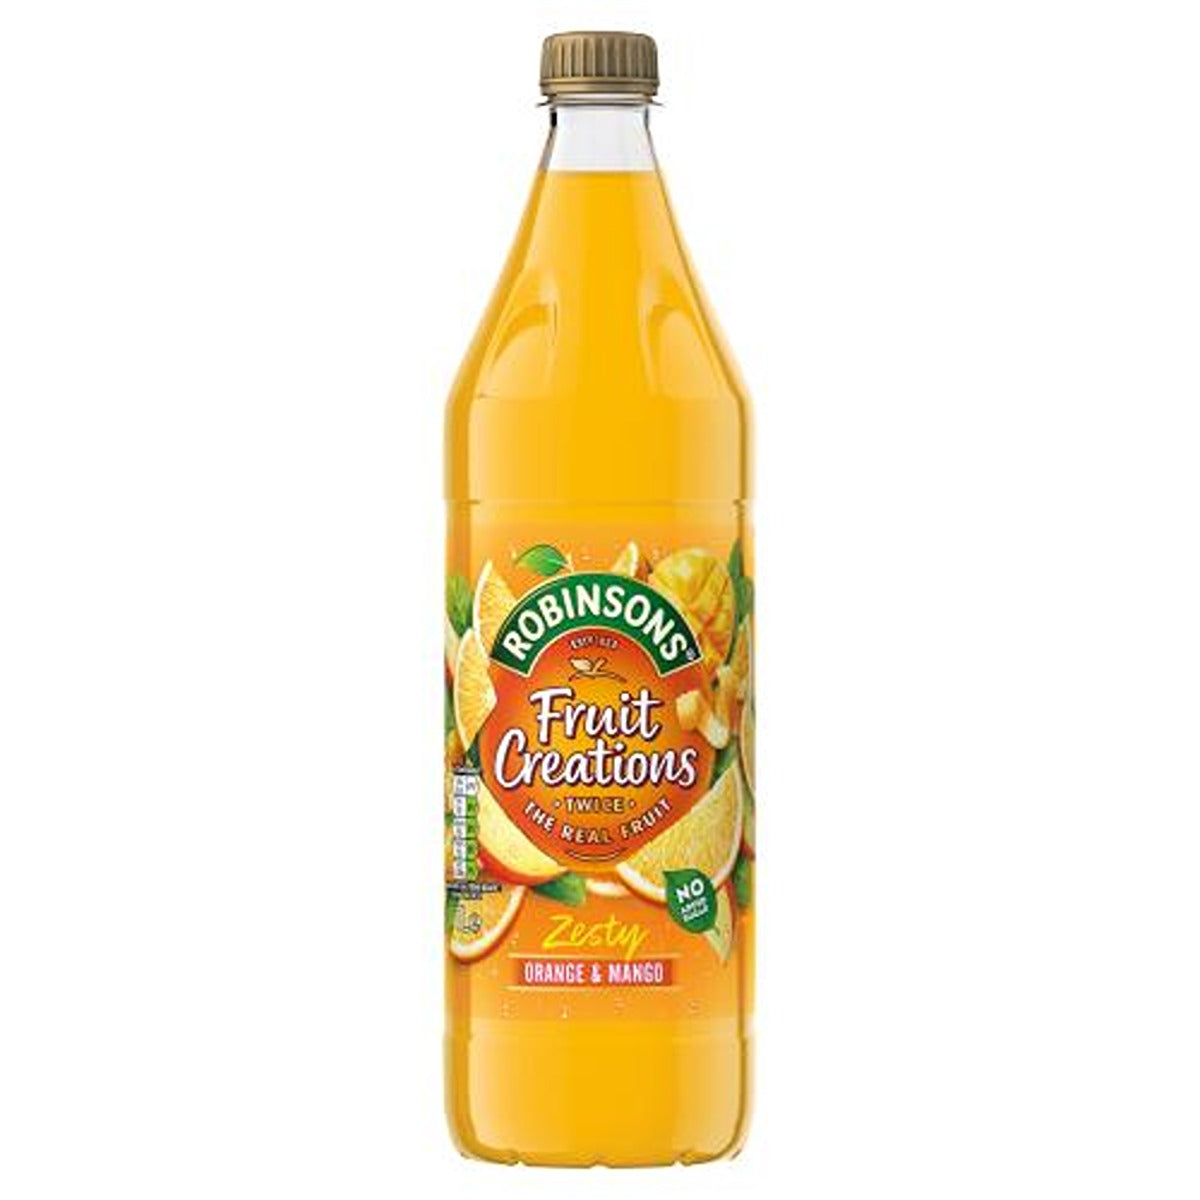 Robinsons - Fruit Creations Orange and Mango - 1L - Continental Food Store